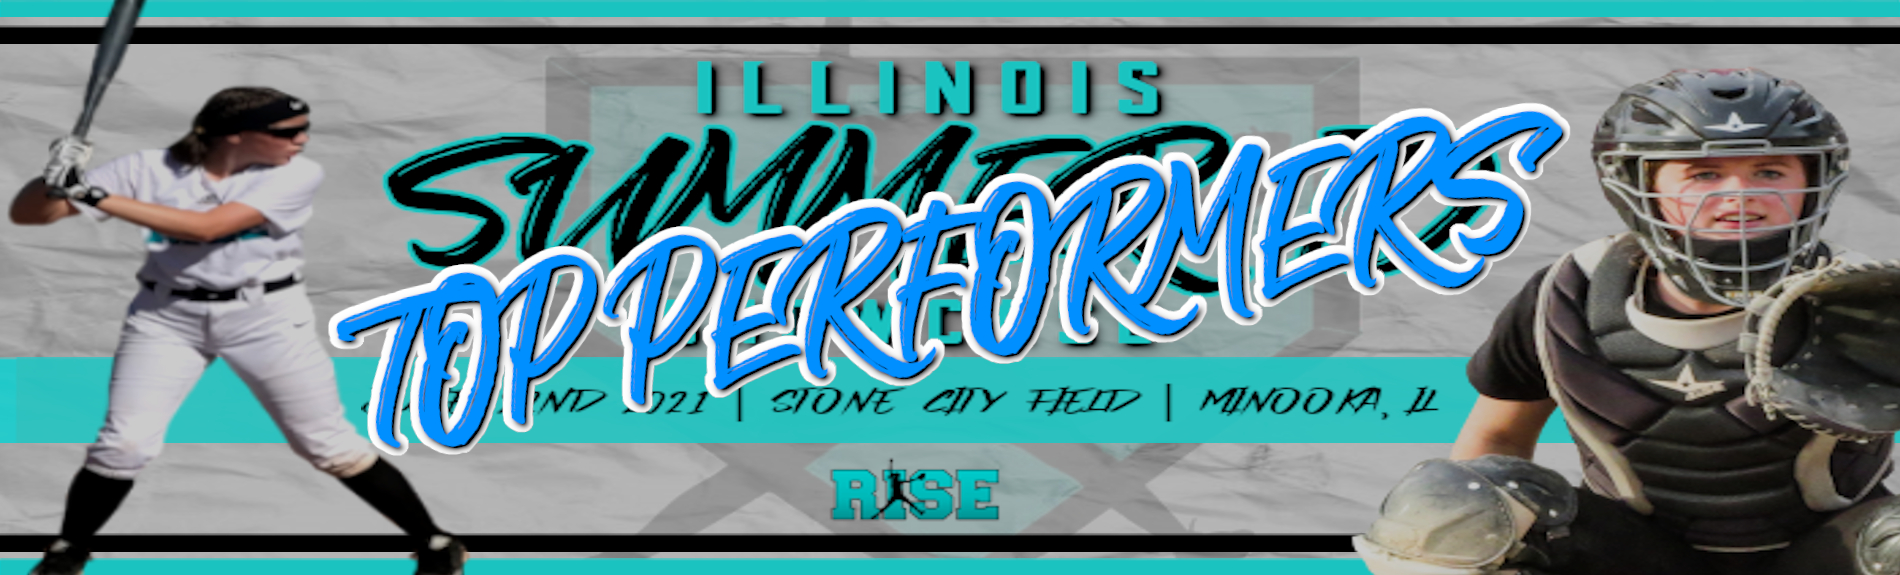 Illinois Summer ID Showcase “TOP PERFORMERS”